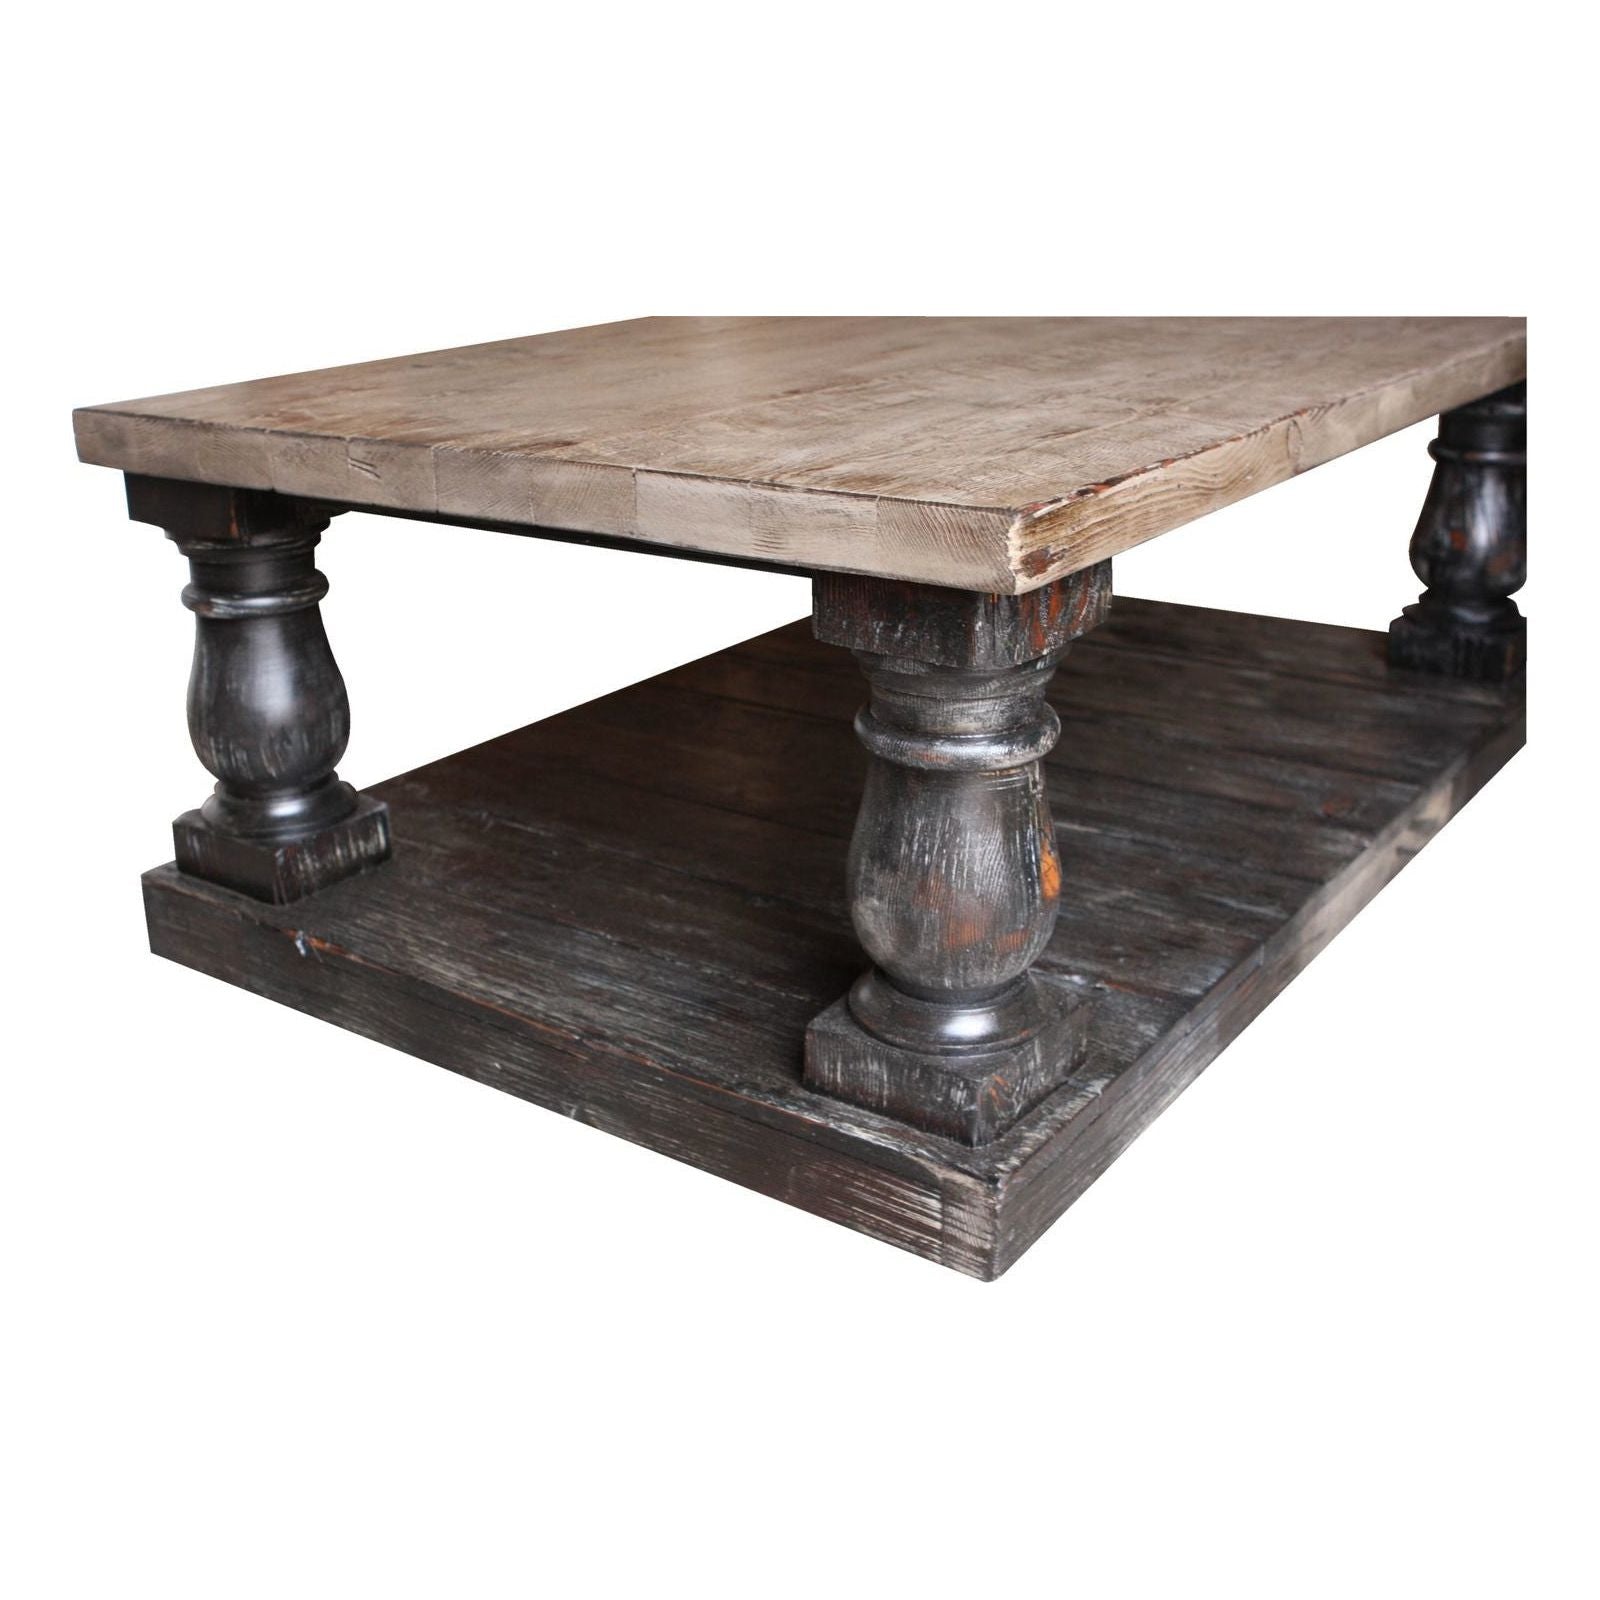 Postobello Large Turned Leg Coffee Table Built In Reclaimed Wood Coffee Tables Handcrafted From Reclaimed Timbers Recycled From Old Buildi Mortise Tenon